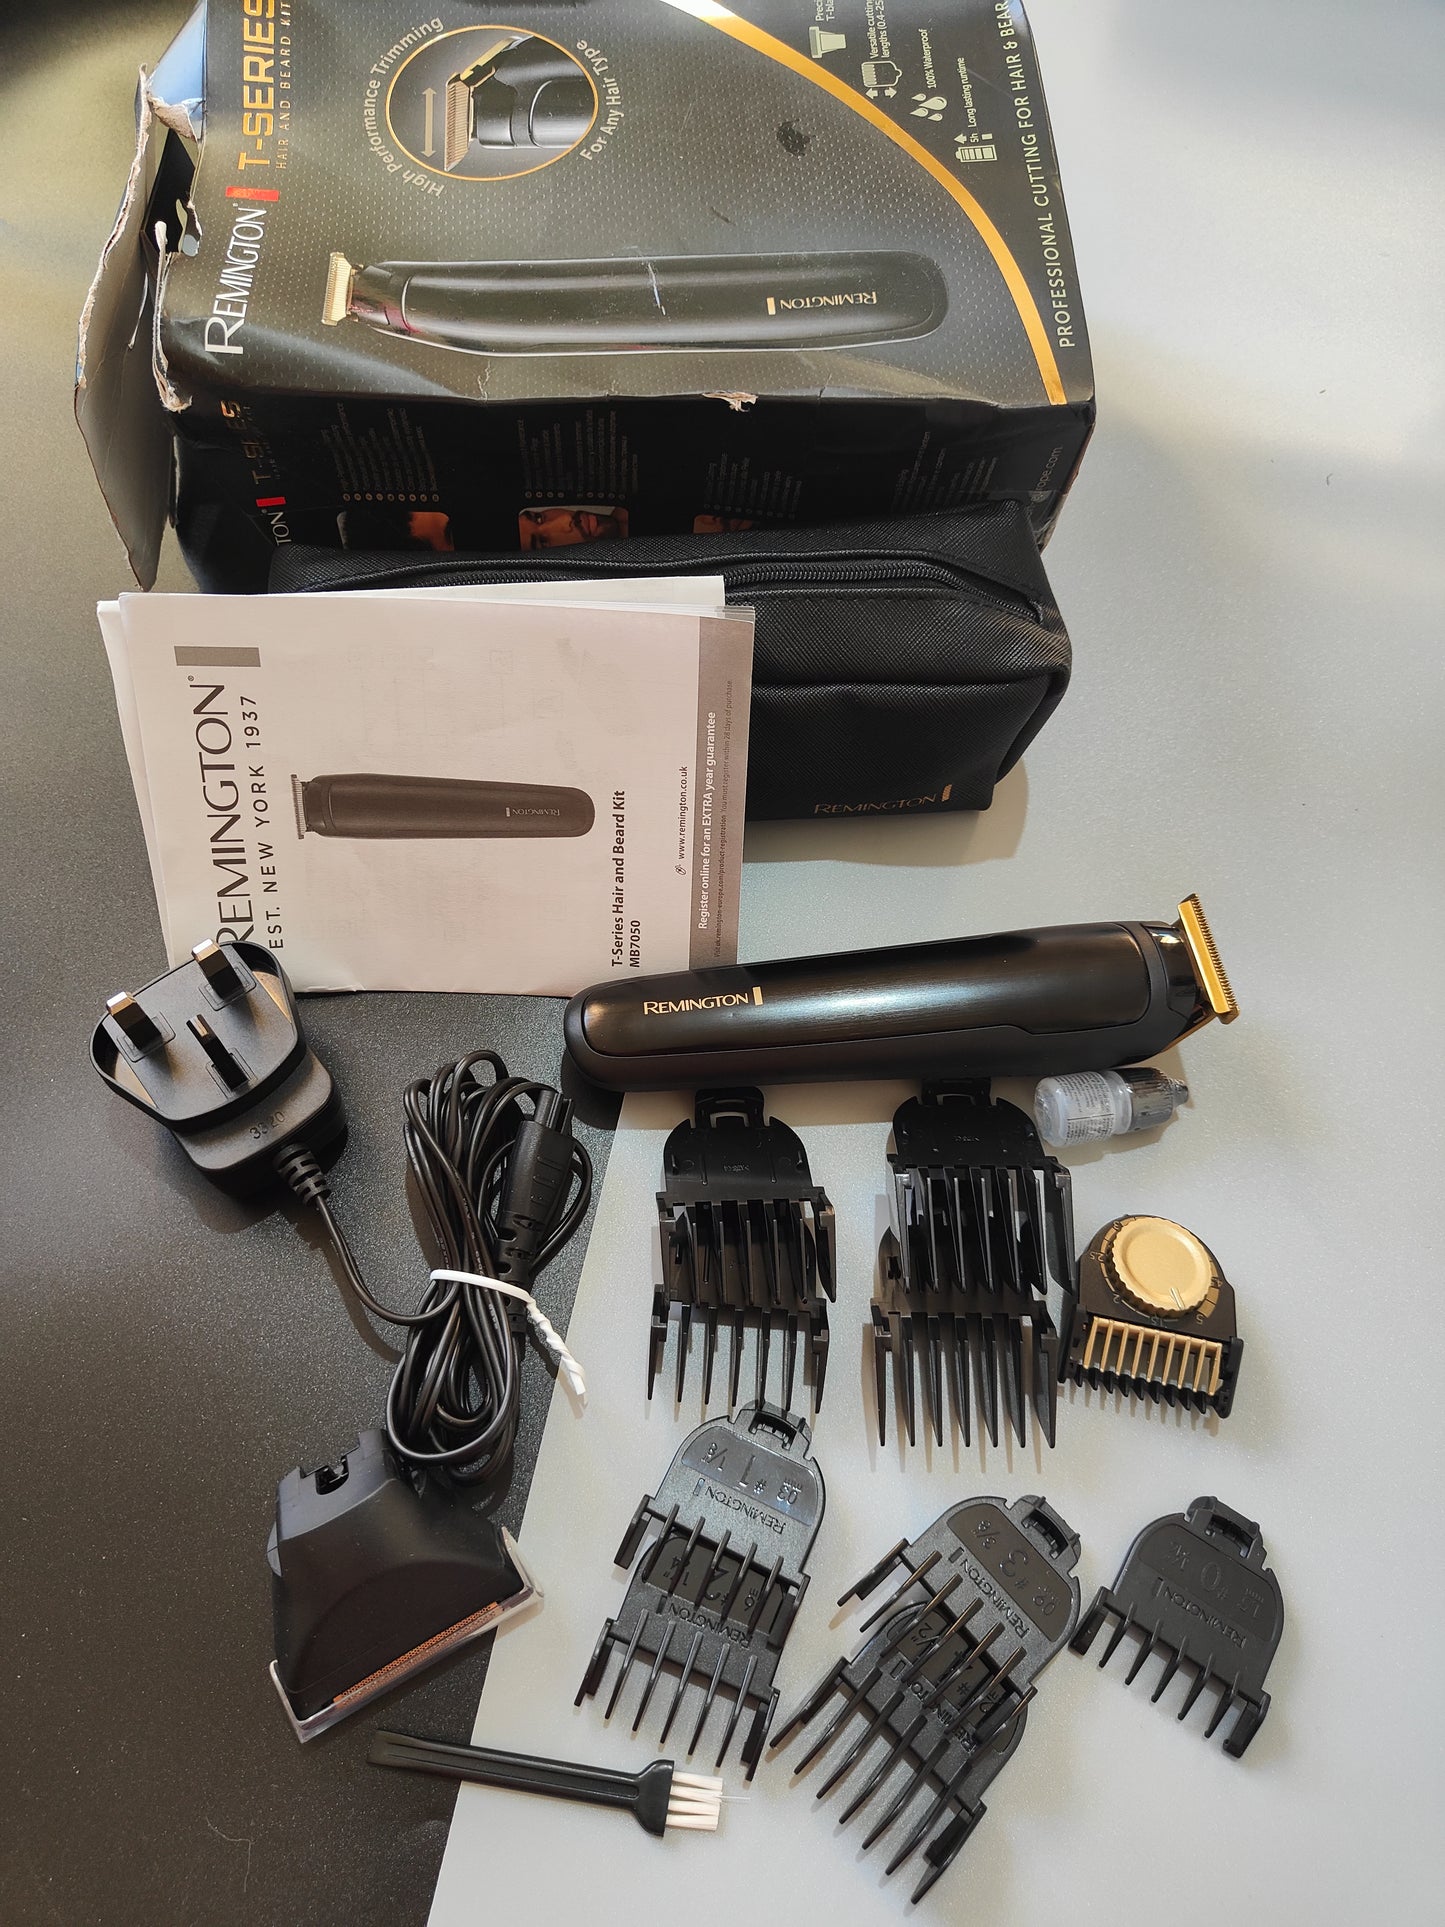 Remington T-Series Men's Hair Clipper and Beard Trimmer Kit - Cordless Professional Grooming Kit with 11 Attachments - MB7050